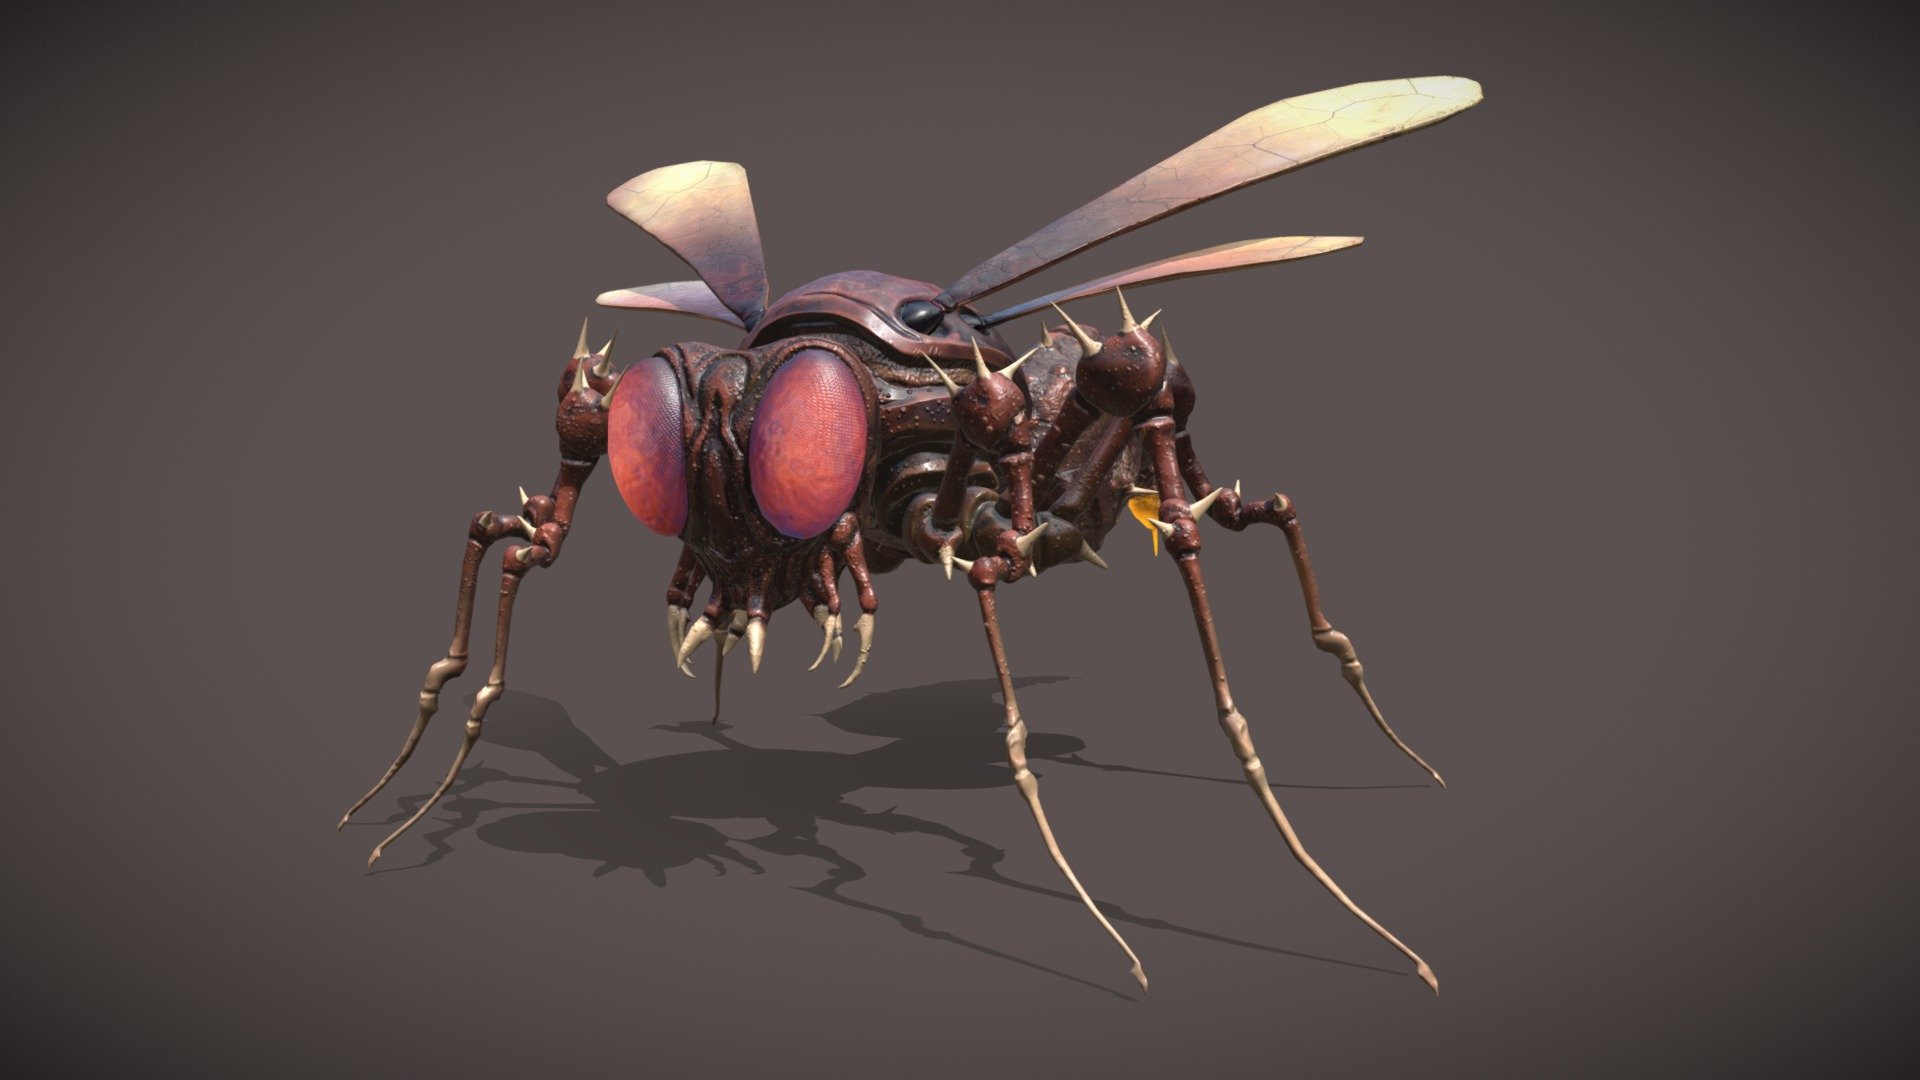 "Thornmite" - Giant Insect Project